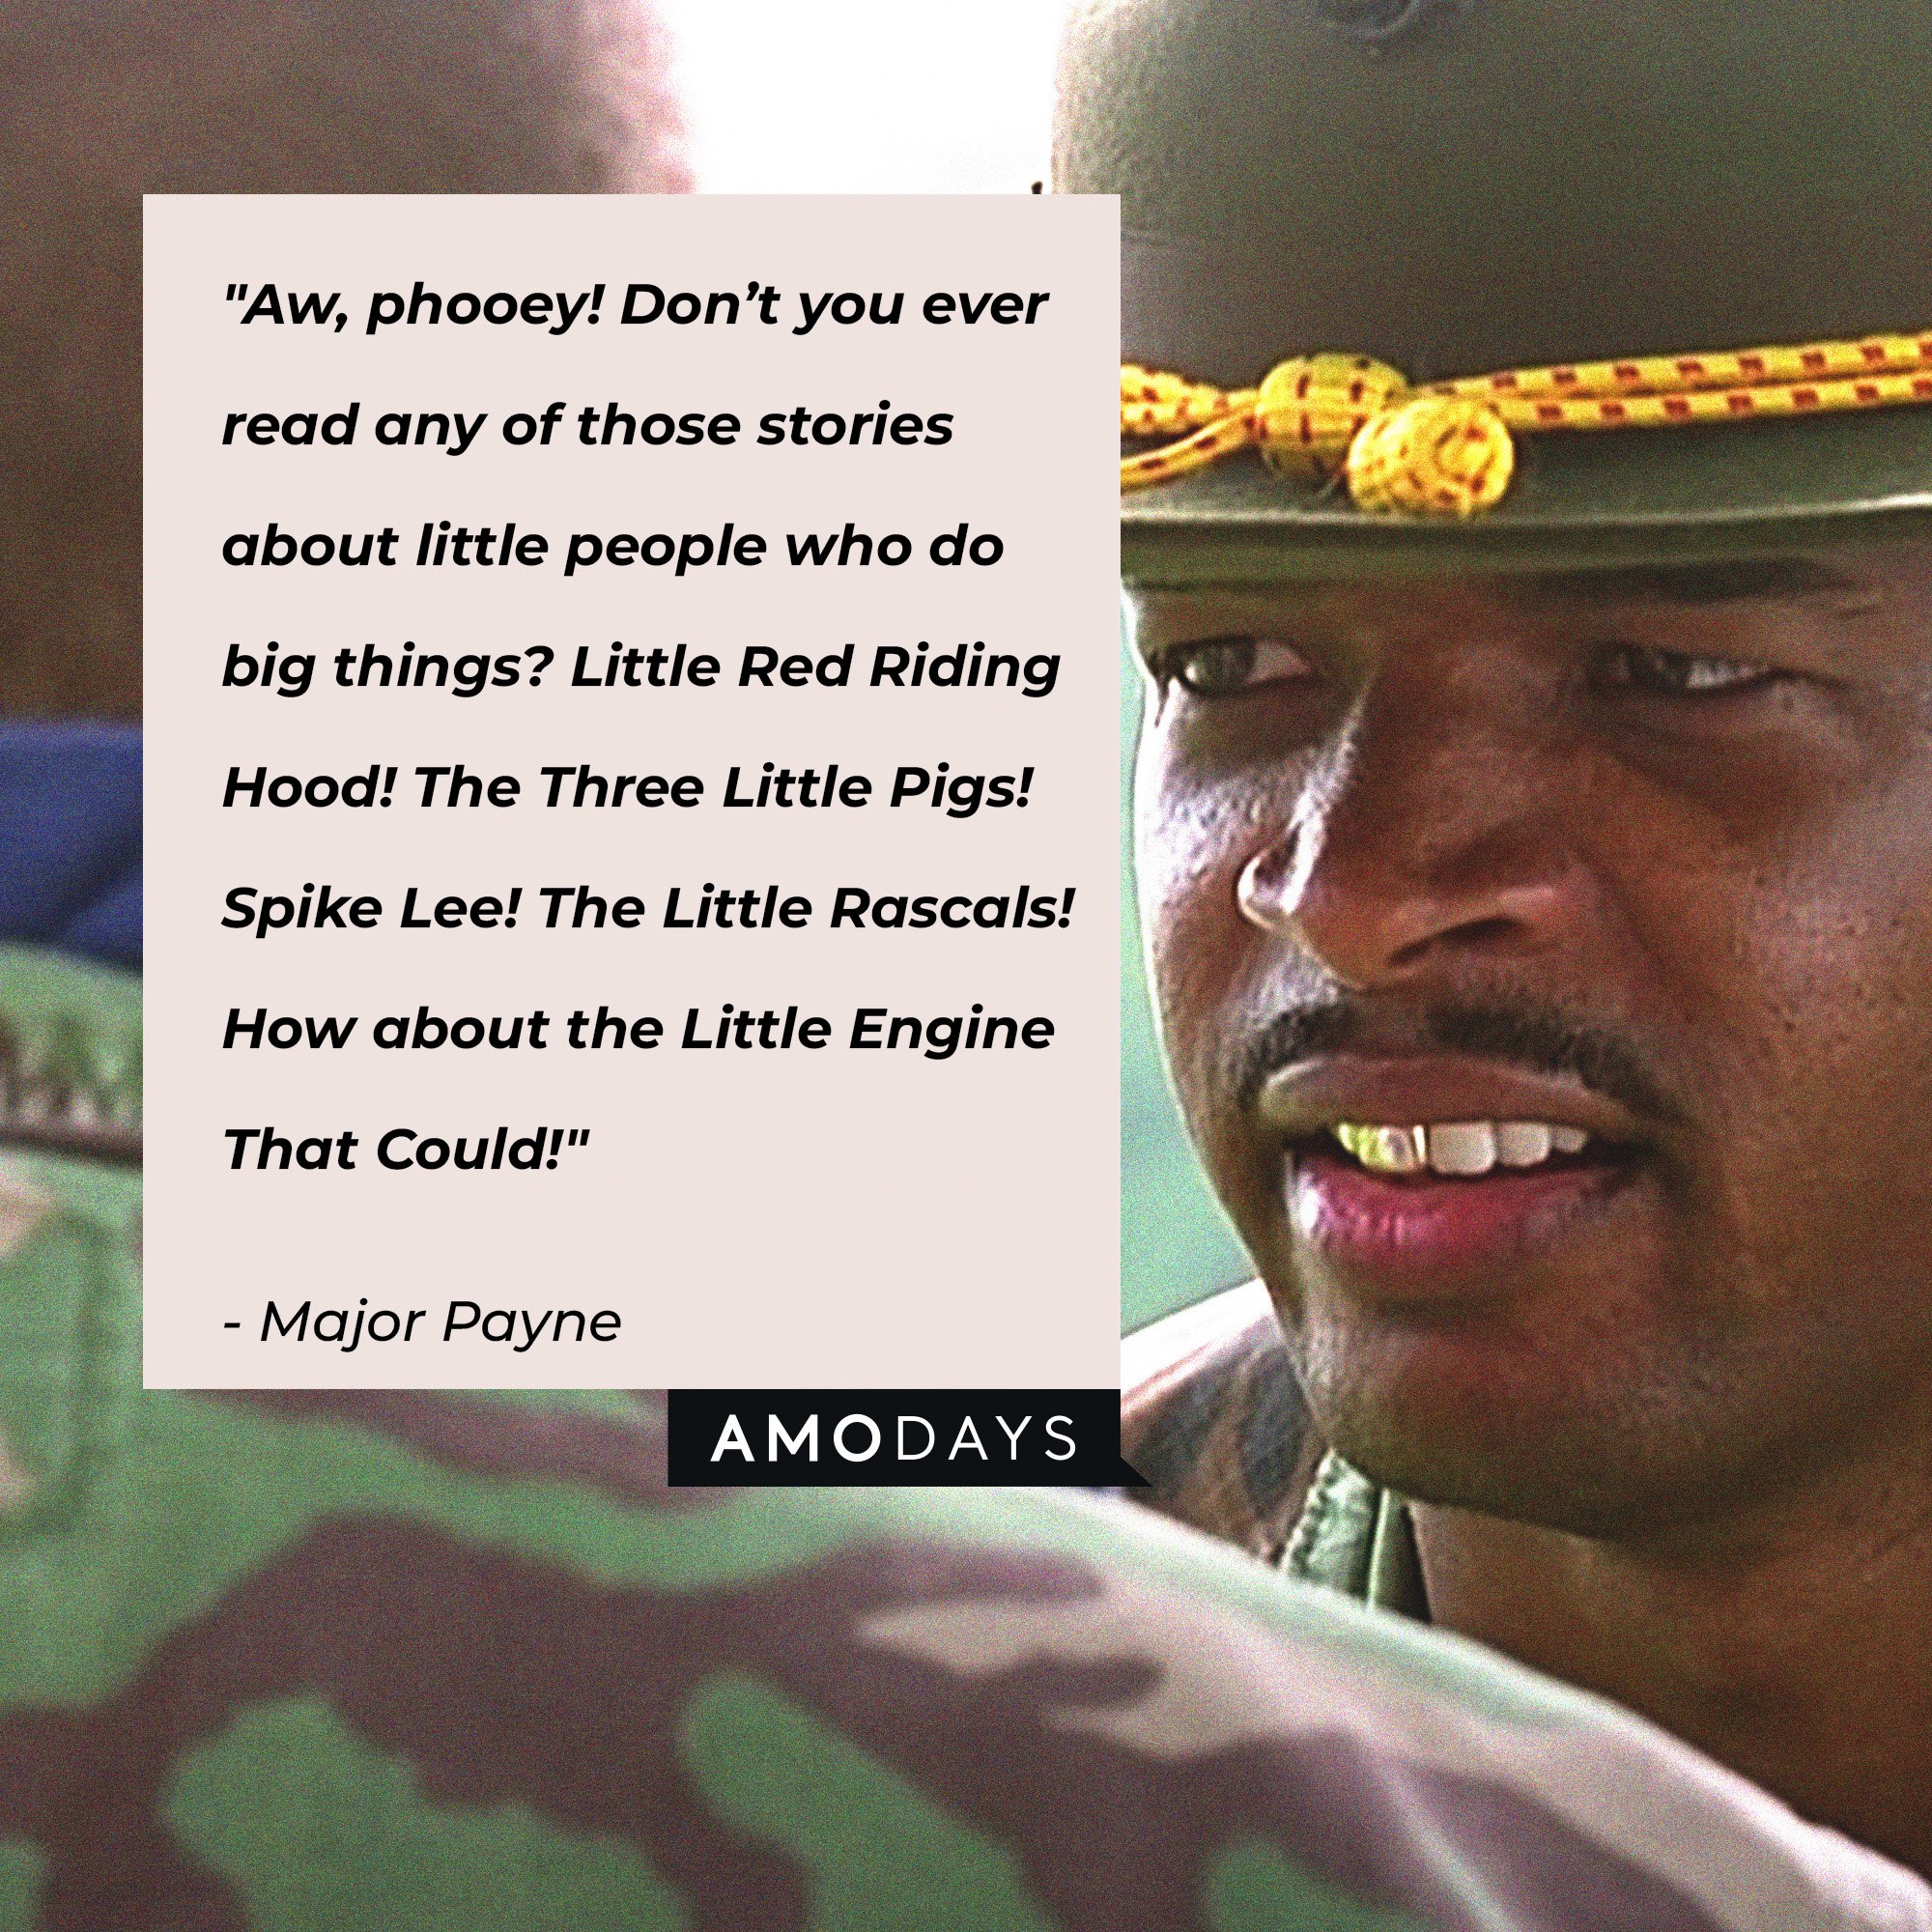 Major Payne's quote: "Aw, phooey! Don't you ever read any of those stories about little people who do big things? Little Red Riding Hood! The Three Little Pigs! Spike Lee! The Little Rascals! How about the Little Engine That Could!"  | Source: Amodays